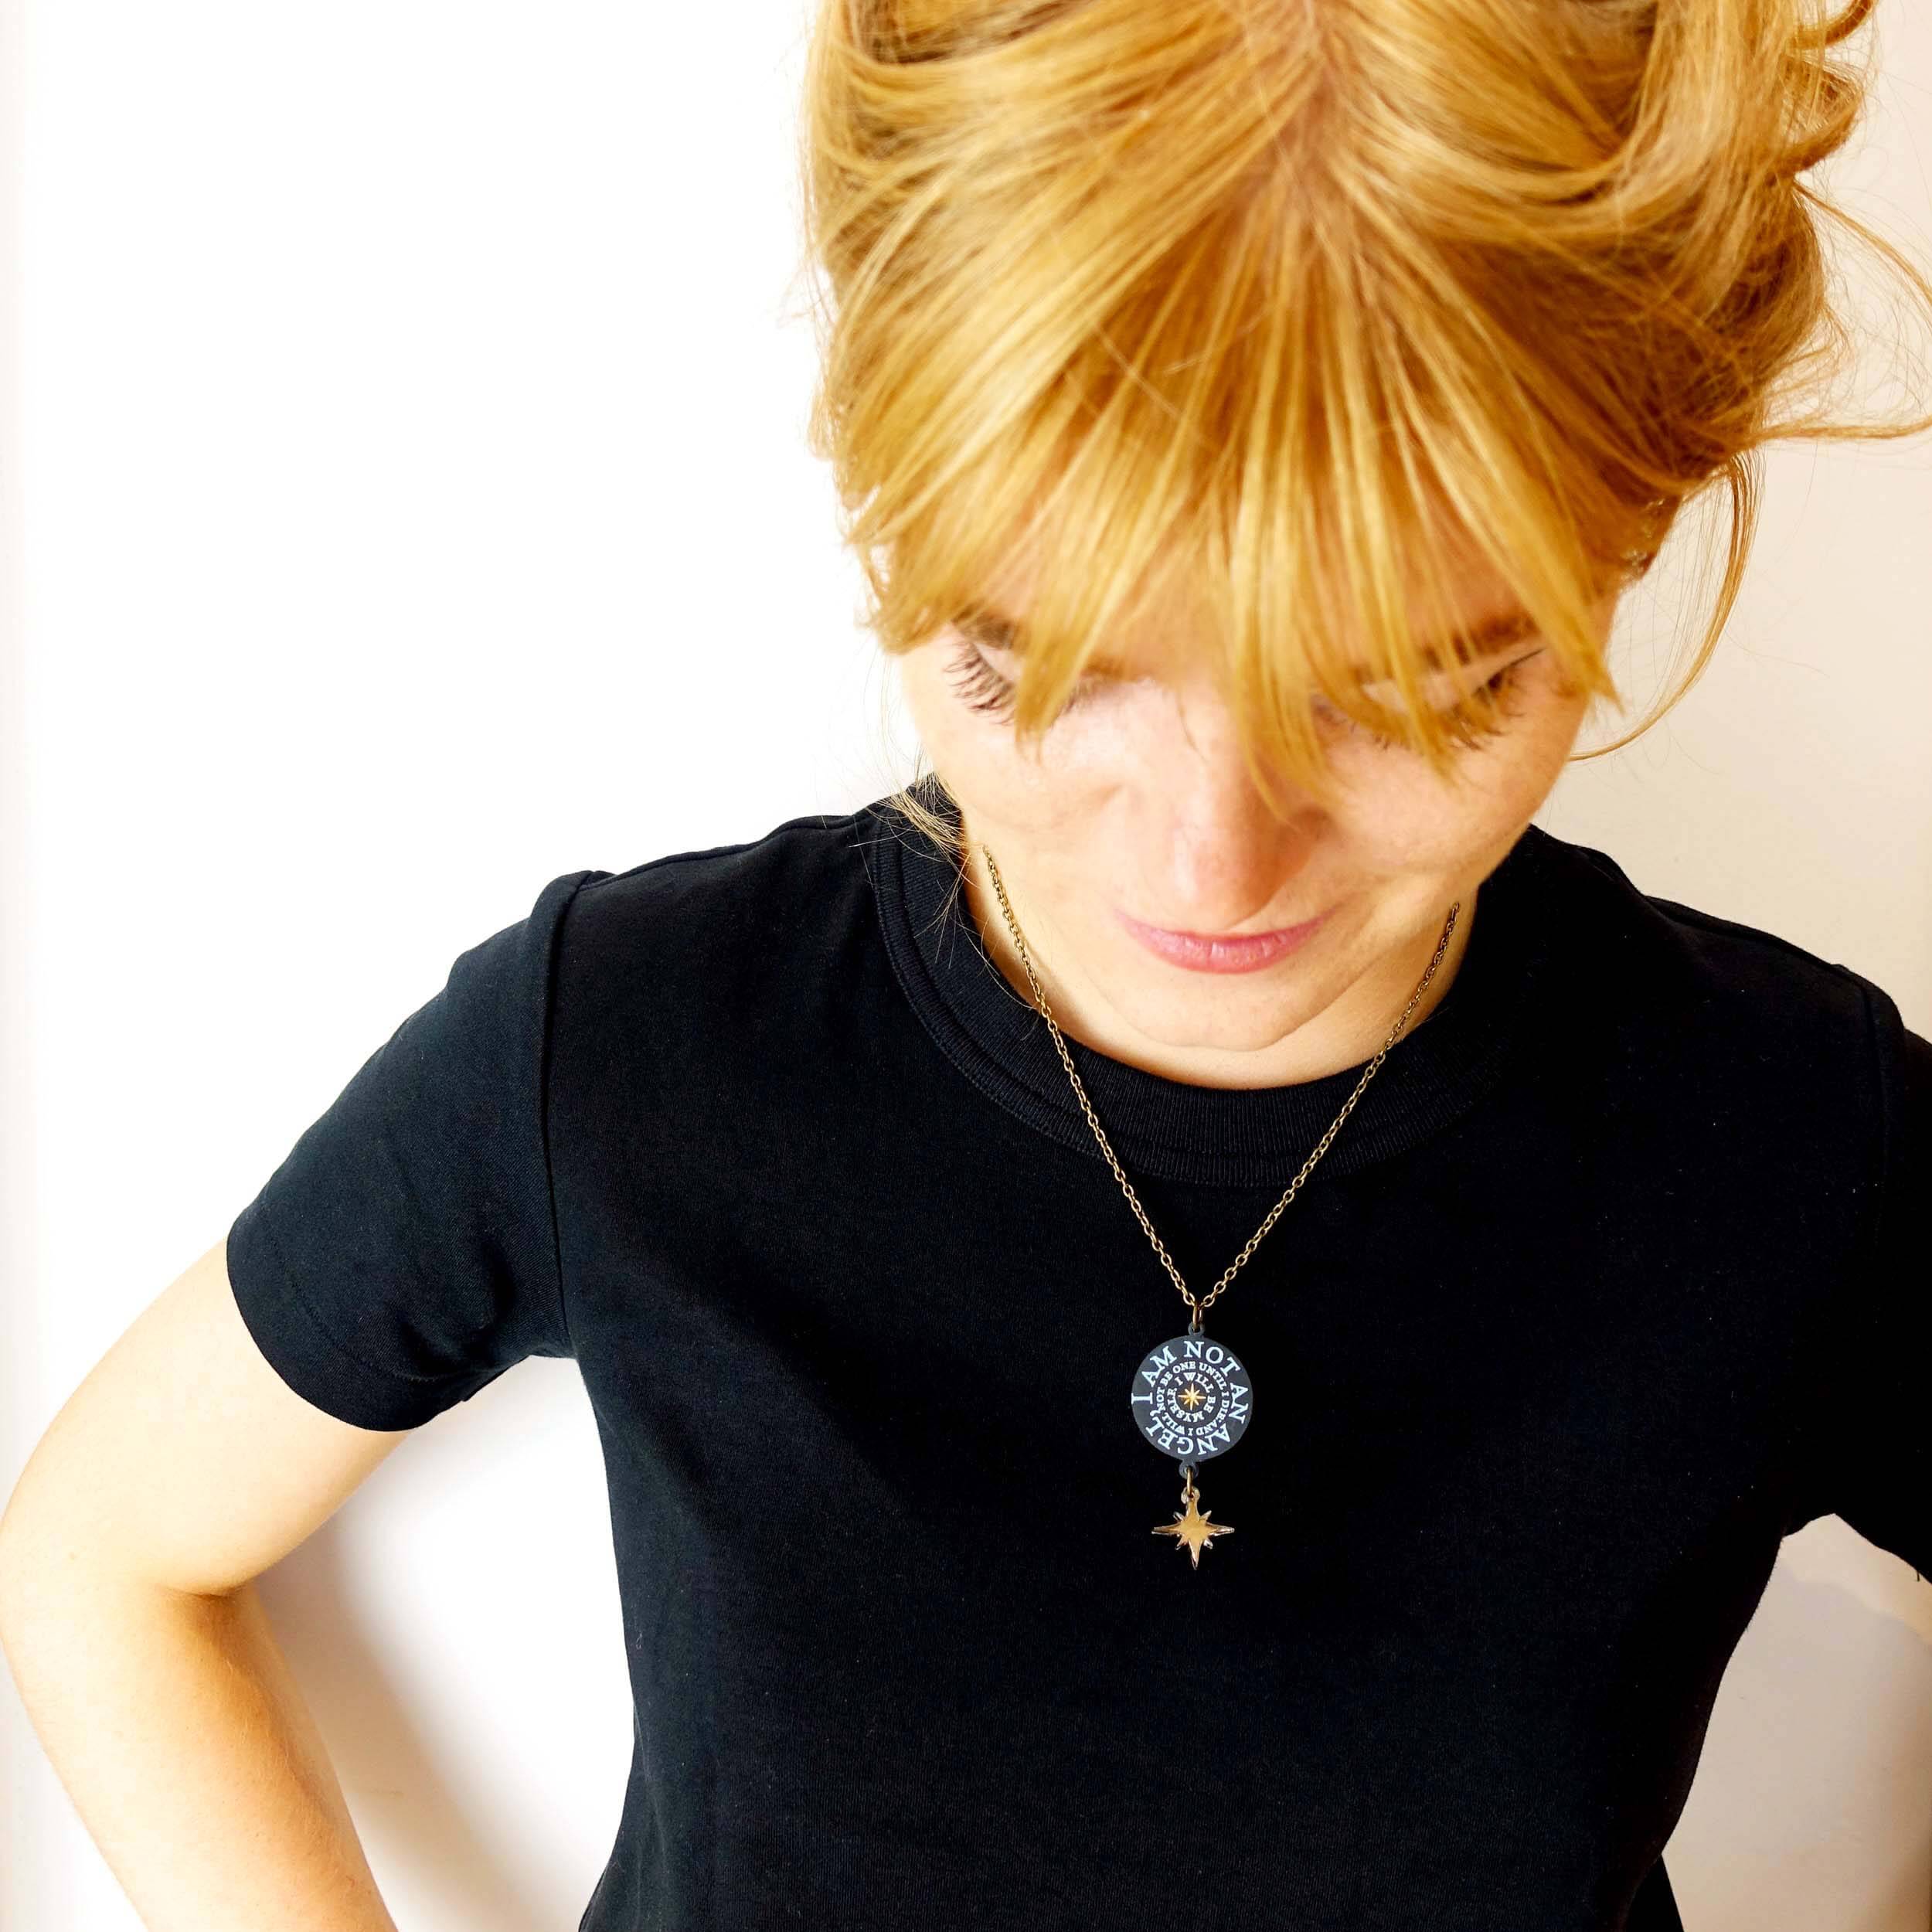 Eliza wears I am not an angel Bronte pendant necklace designed by Sarah Day for Wear and Resist in collaboration with The Bronte Parsonage Museum, Haworth. 